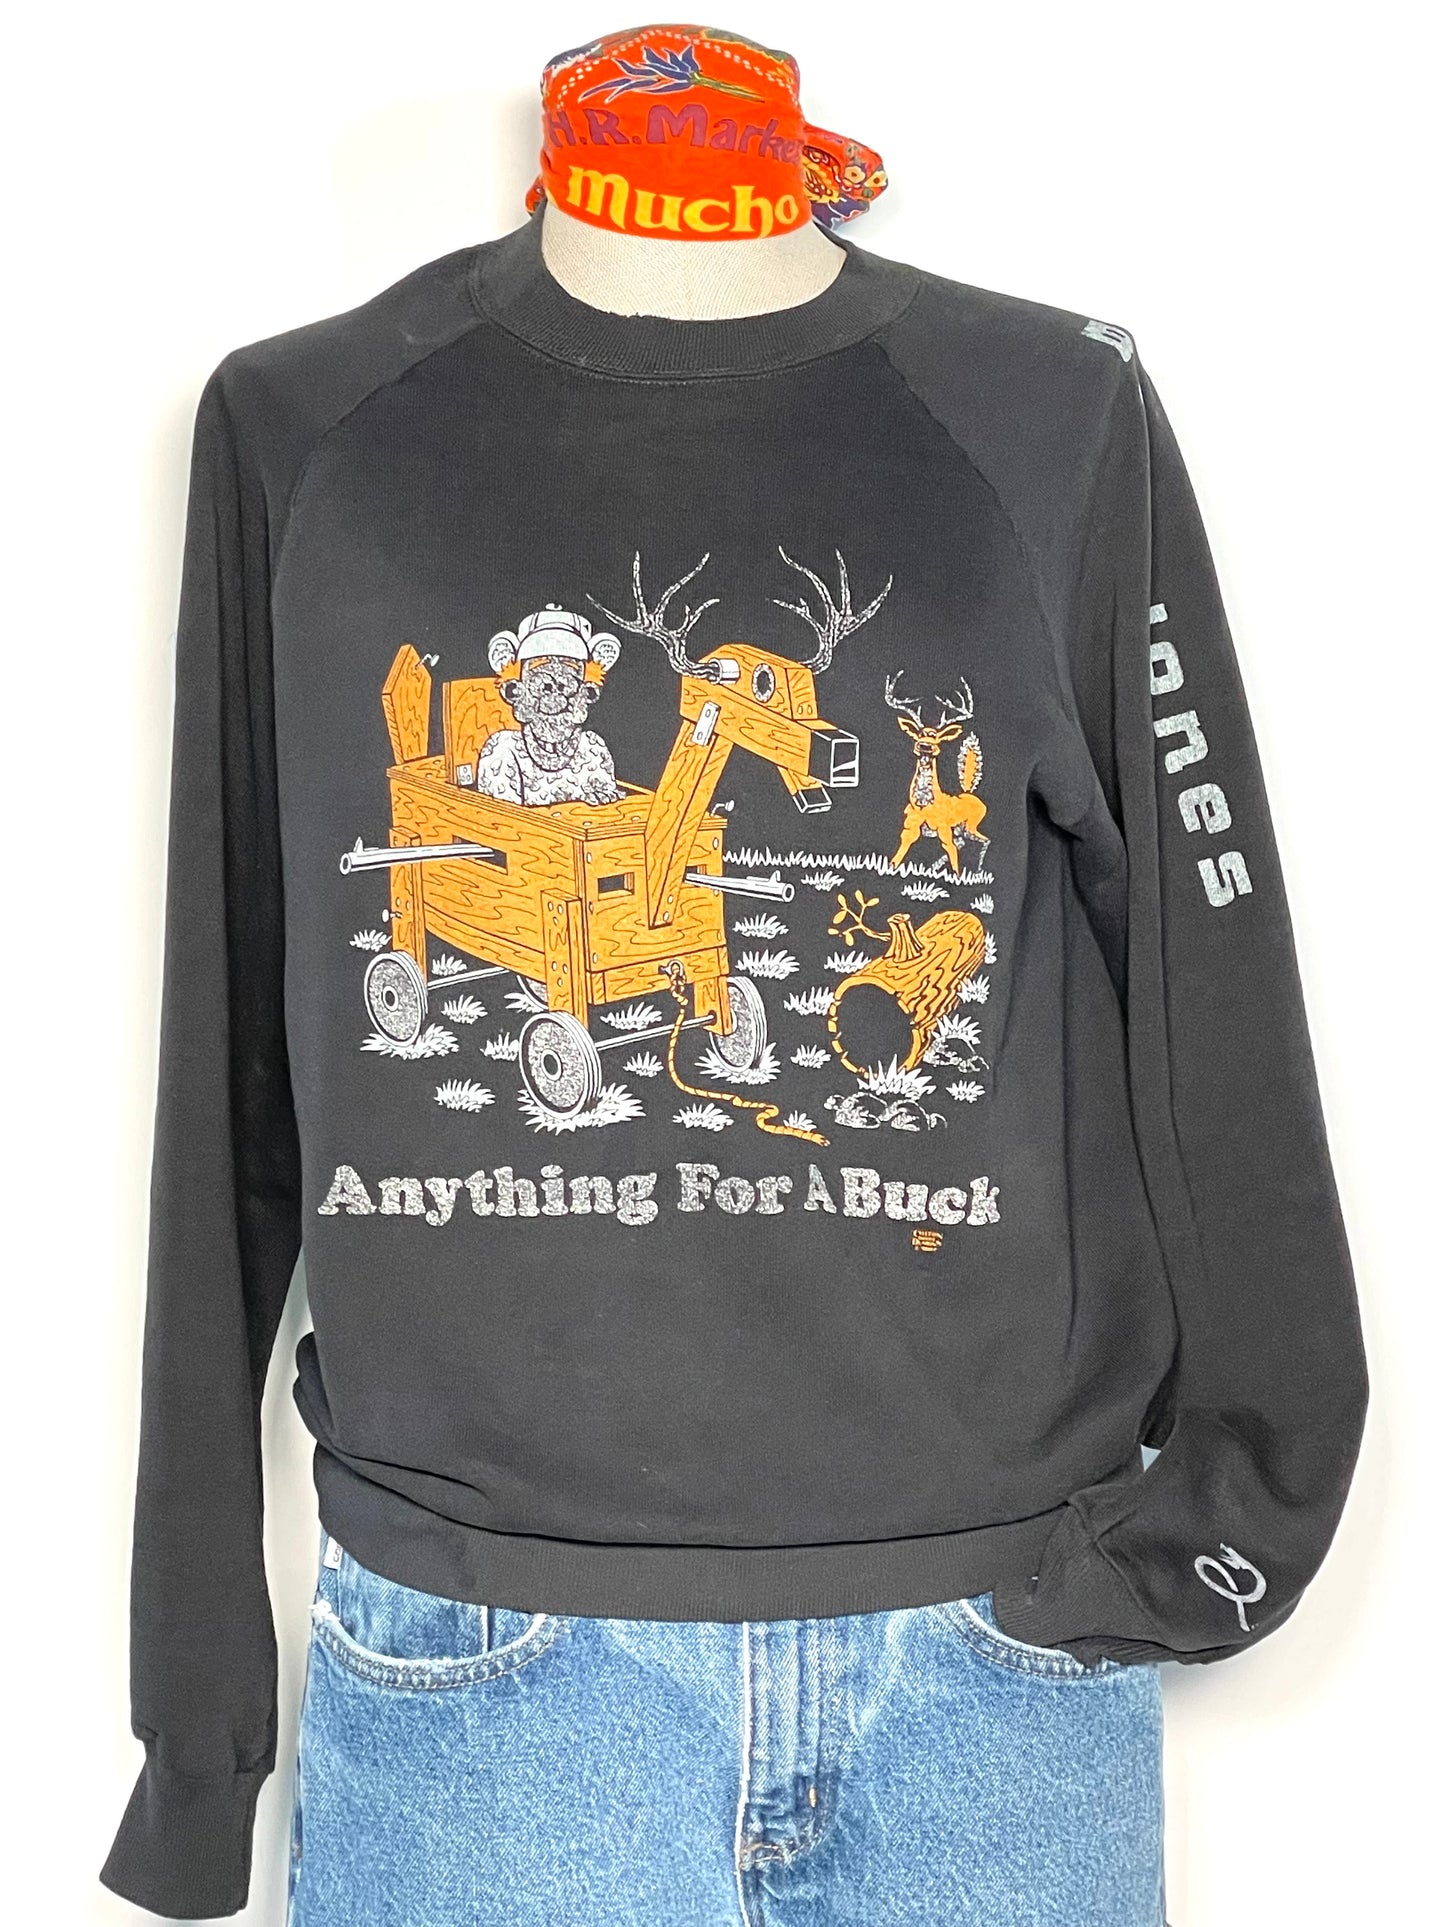 1980s 100% Cotton "Anything for a Buck" Sweatshirt